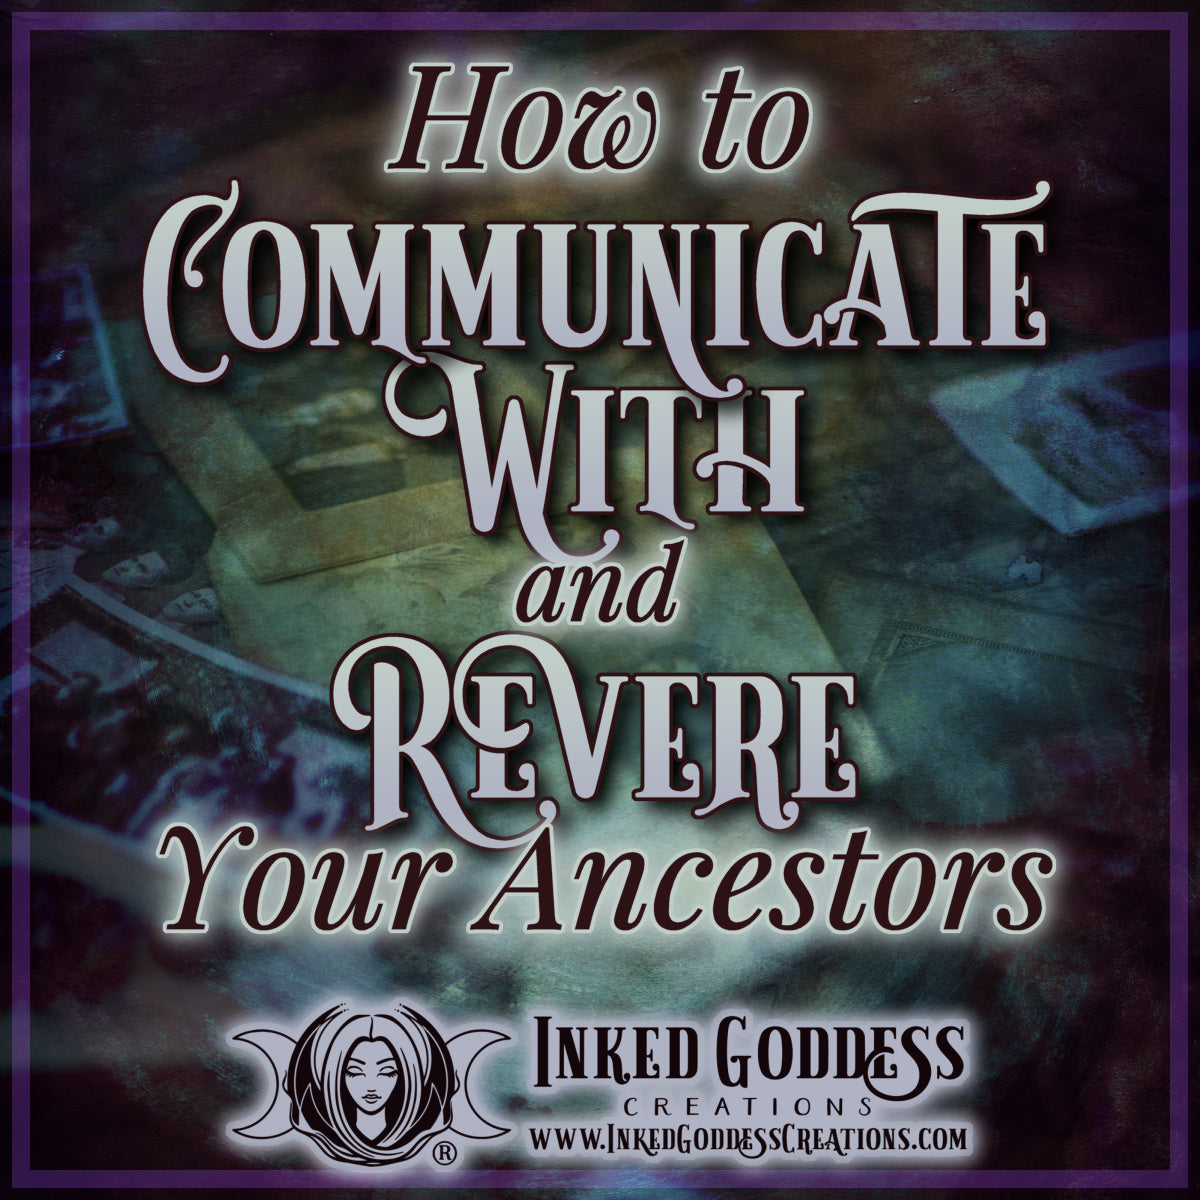 How To Communicate With and Revere Your Ancestors